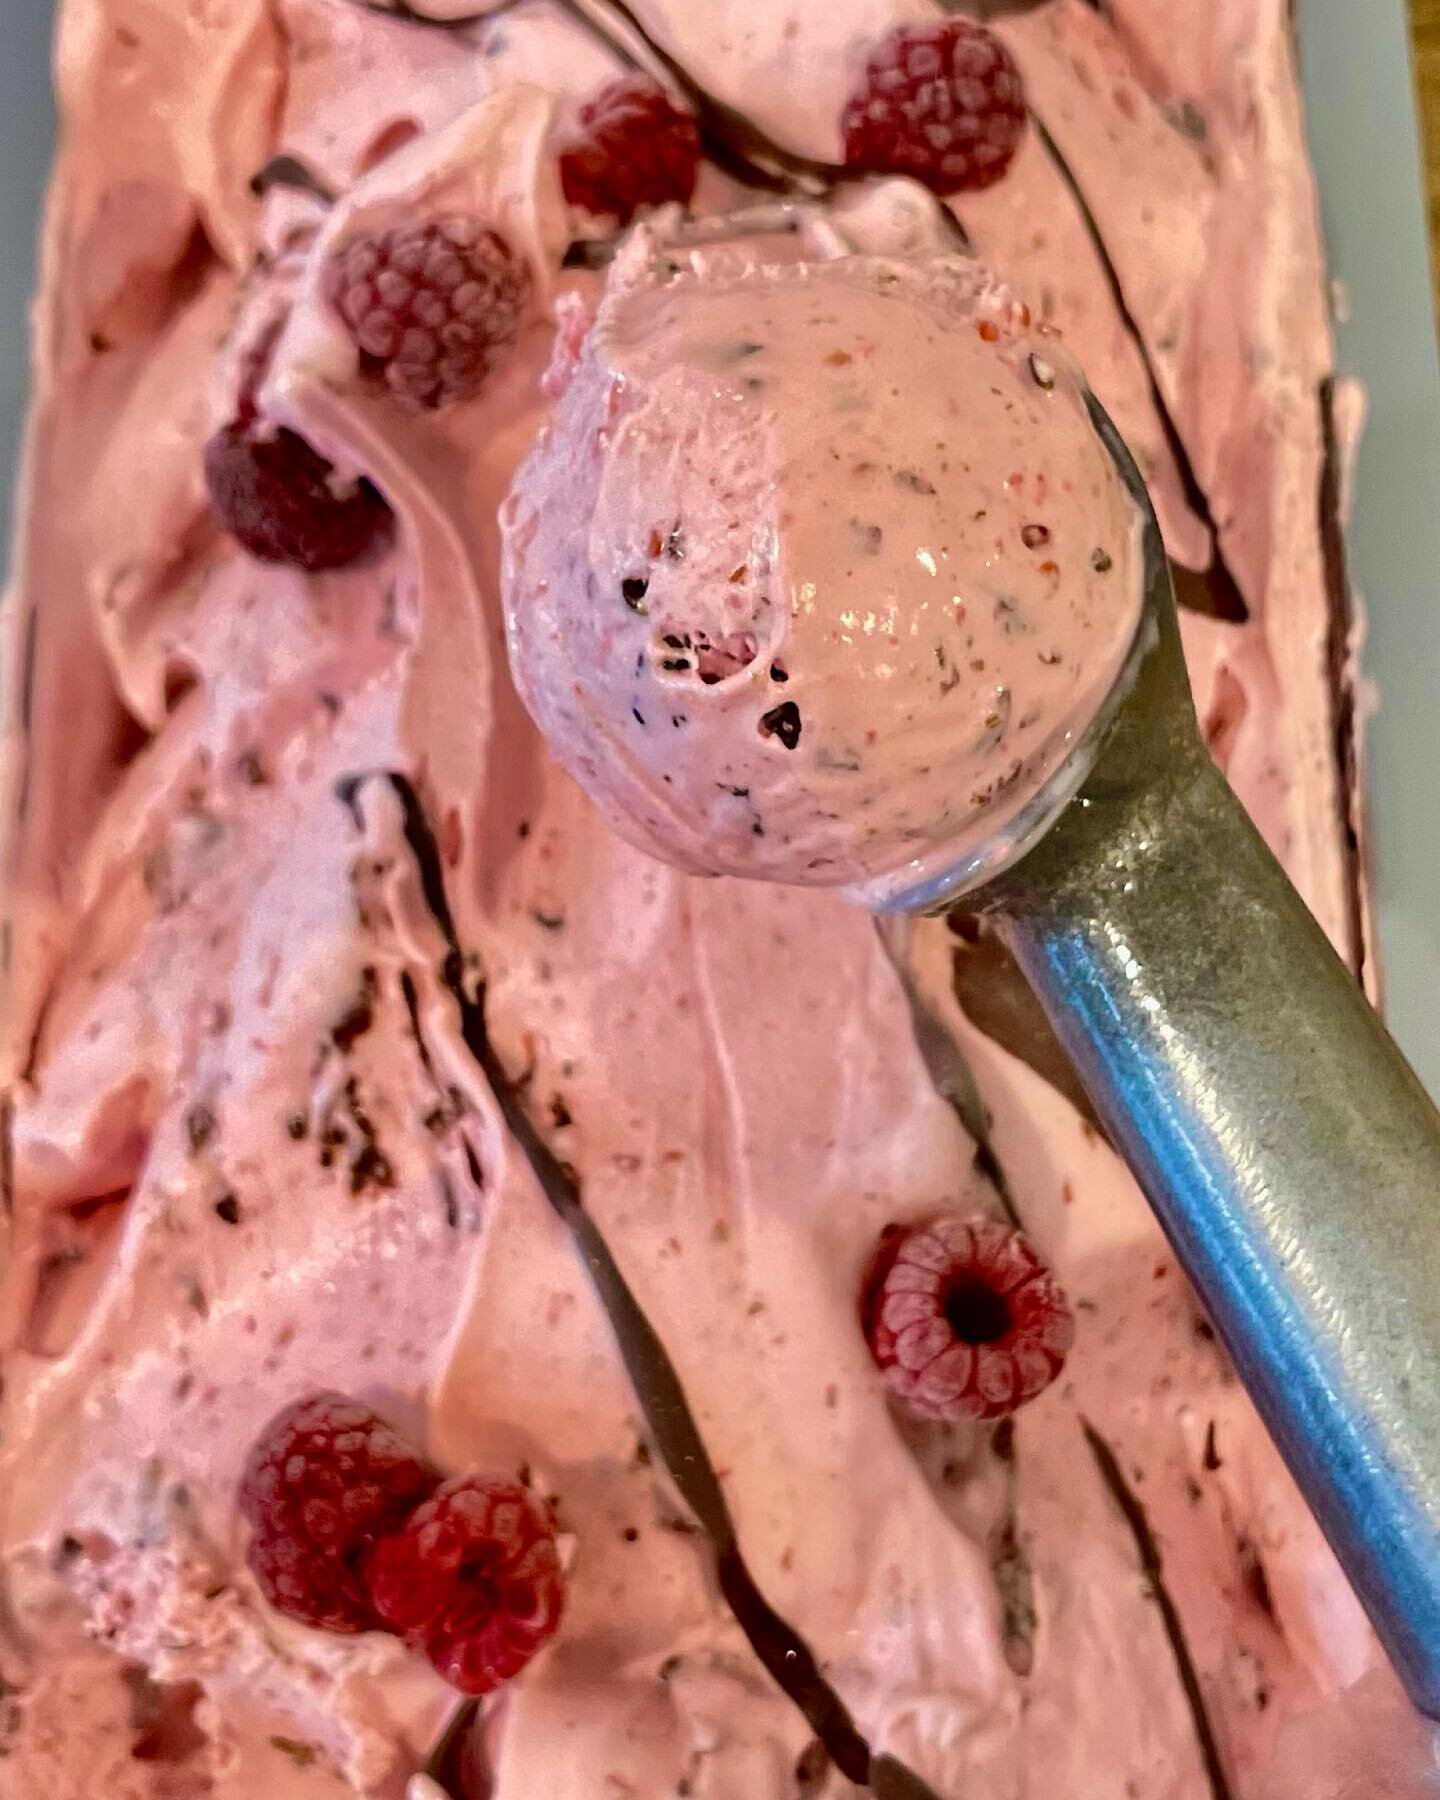 Our newest V-Day 💕flavor on display today.

Raspberry Nutella Truffle Gelato 🍨🥰

Sweet concoction of :
Fresh Raspberries, Chocolate Ganache and Nutella 🤤 🍫💝

We made quite a few batches of this so everyone gets to feel the love 💗 🍨🍦🥰